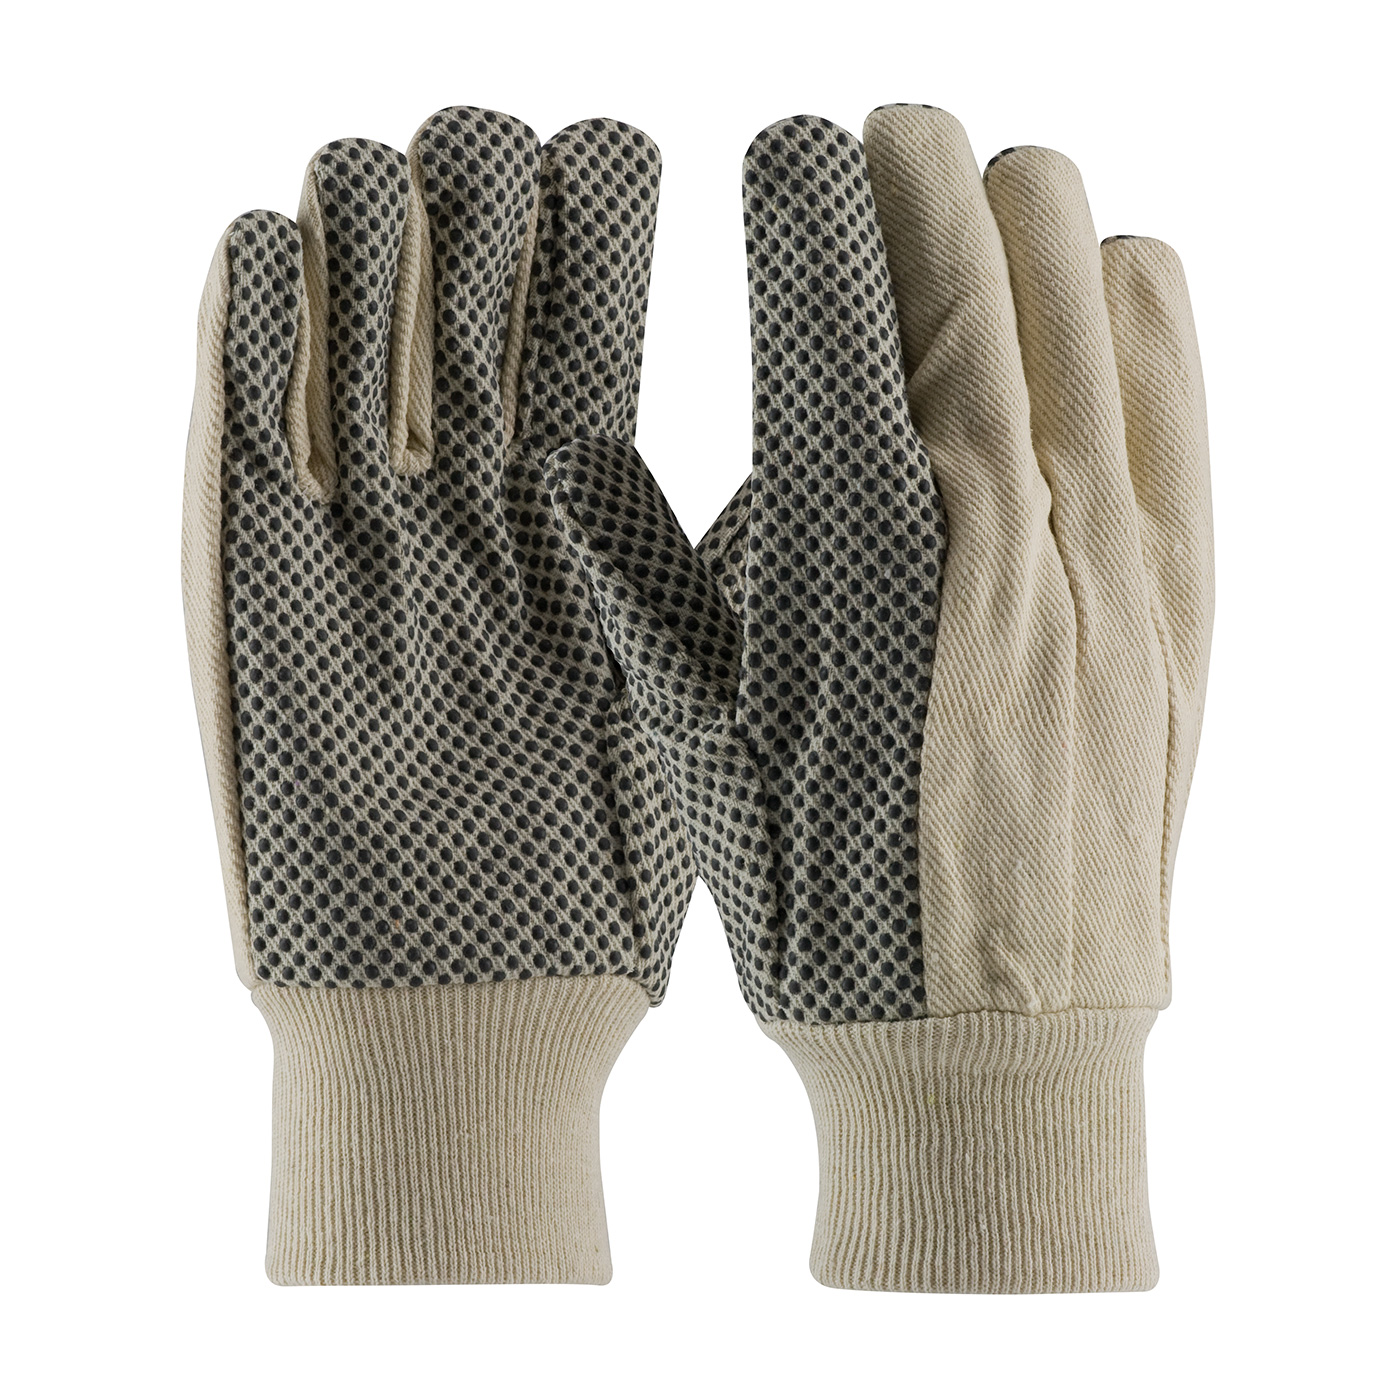 PIP 91-908PD Premium Grade Cotton Canvas Glove with PVC Dot Grip on Palm, Thumb and Forefinger - 8 oz PID-91 908PD